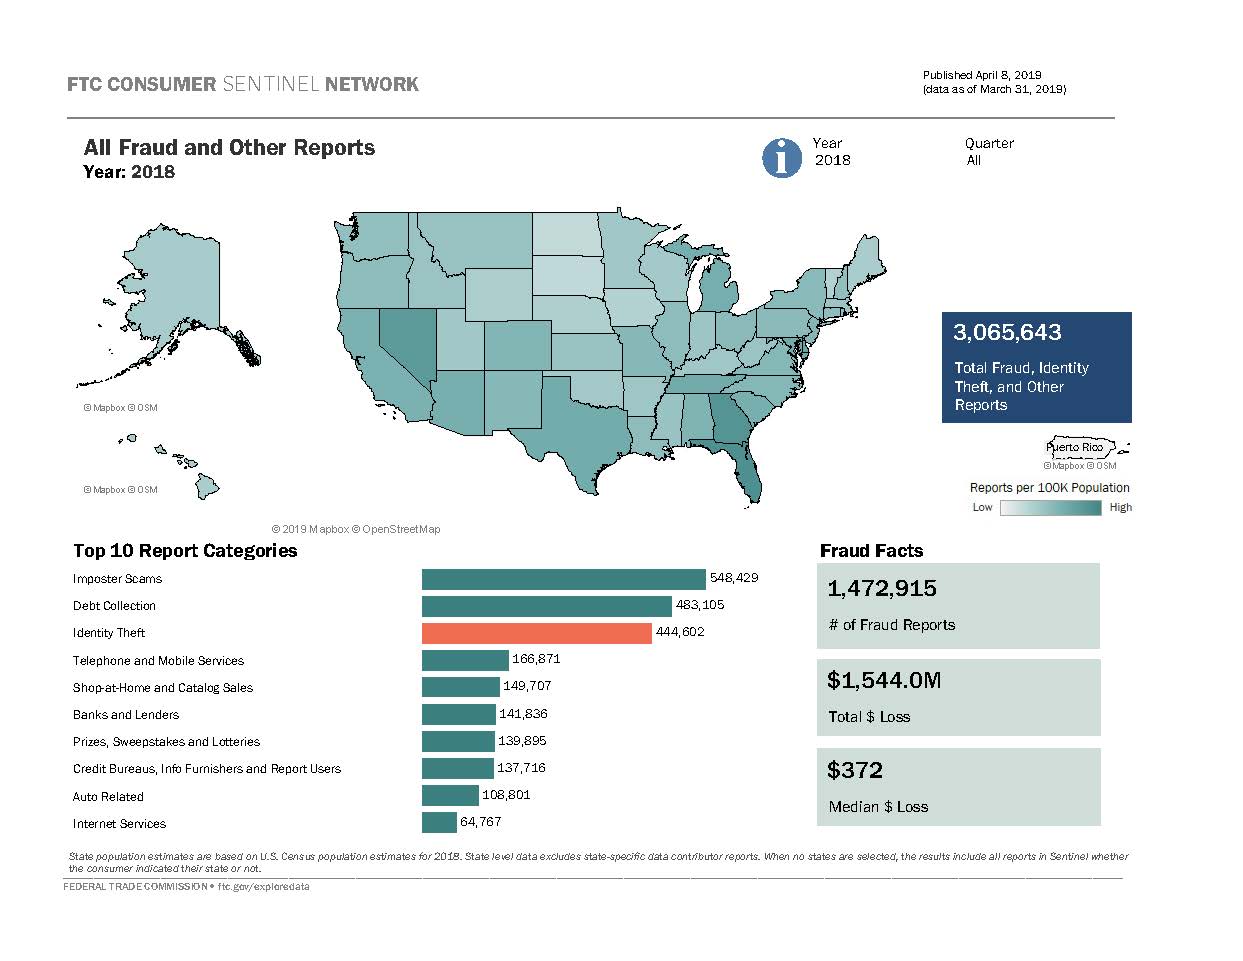 Link to interactive U.S. map and other visualizations showing fraud and id theft data by state based on consumer reports.